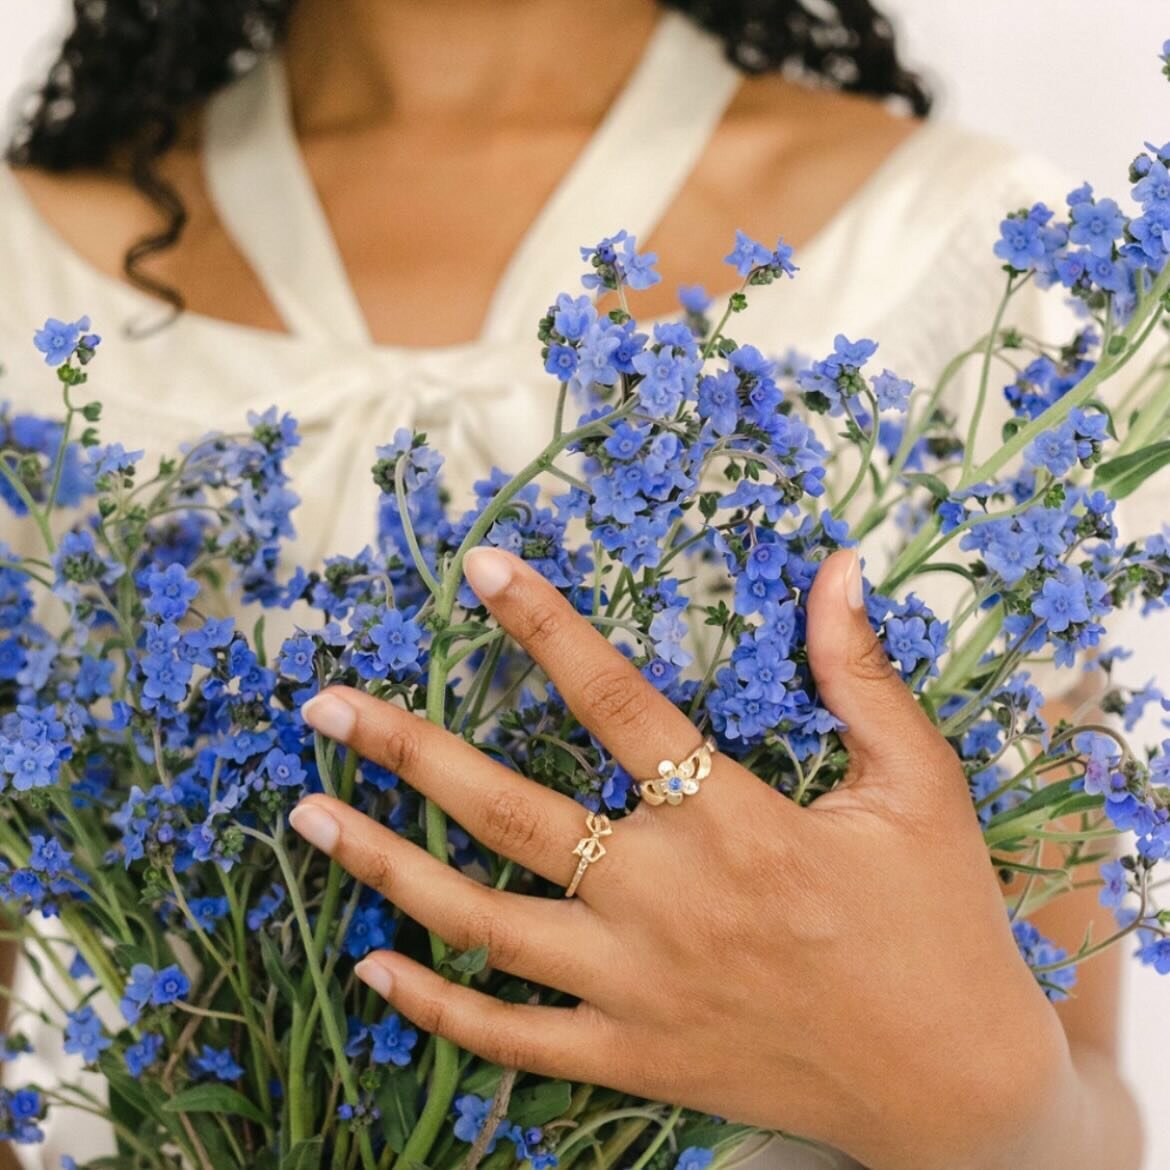 Forget-Me-Not ❤️ As the name states, giving a loved one this flower means &ldquo;forget me not.&rdquo; Often gifted between lovers when they would be separated for a length of time, but also used as a token of affection between friends.

Our T&amp;B 